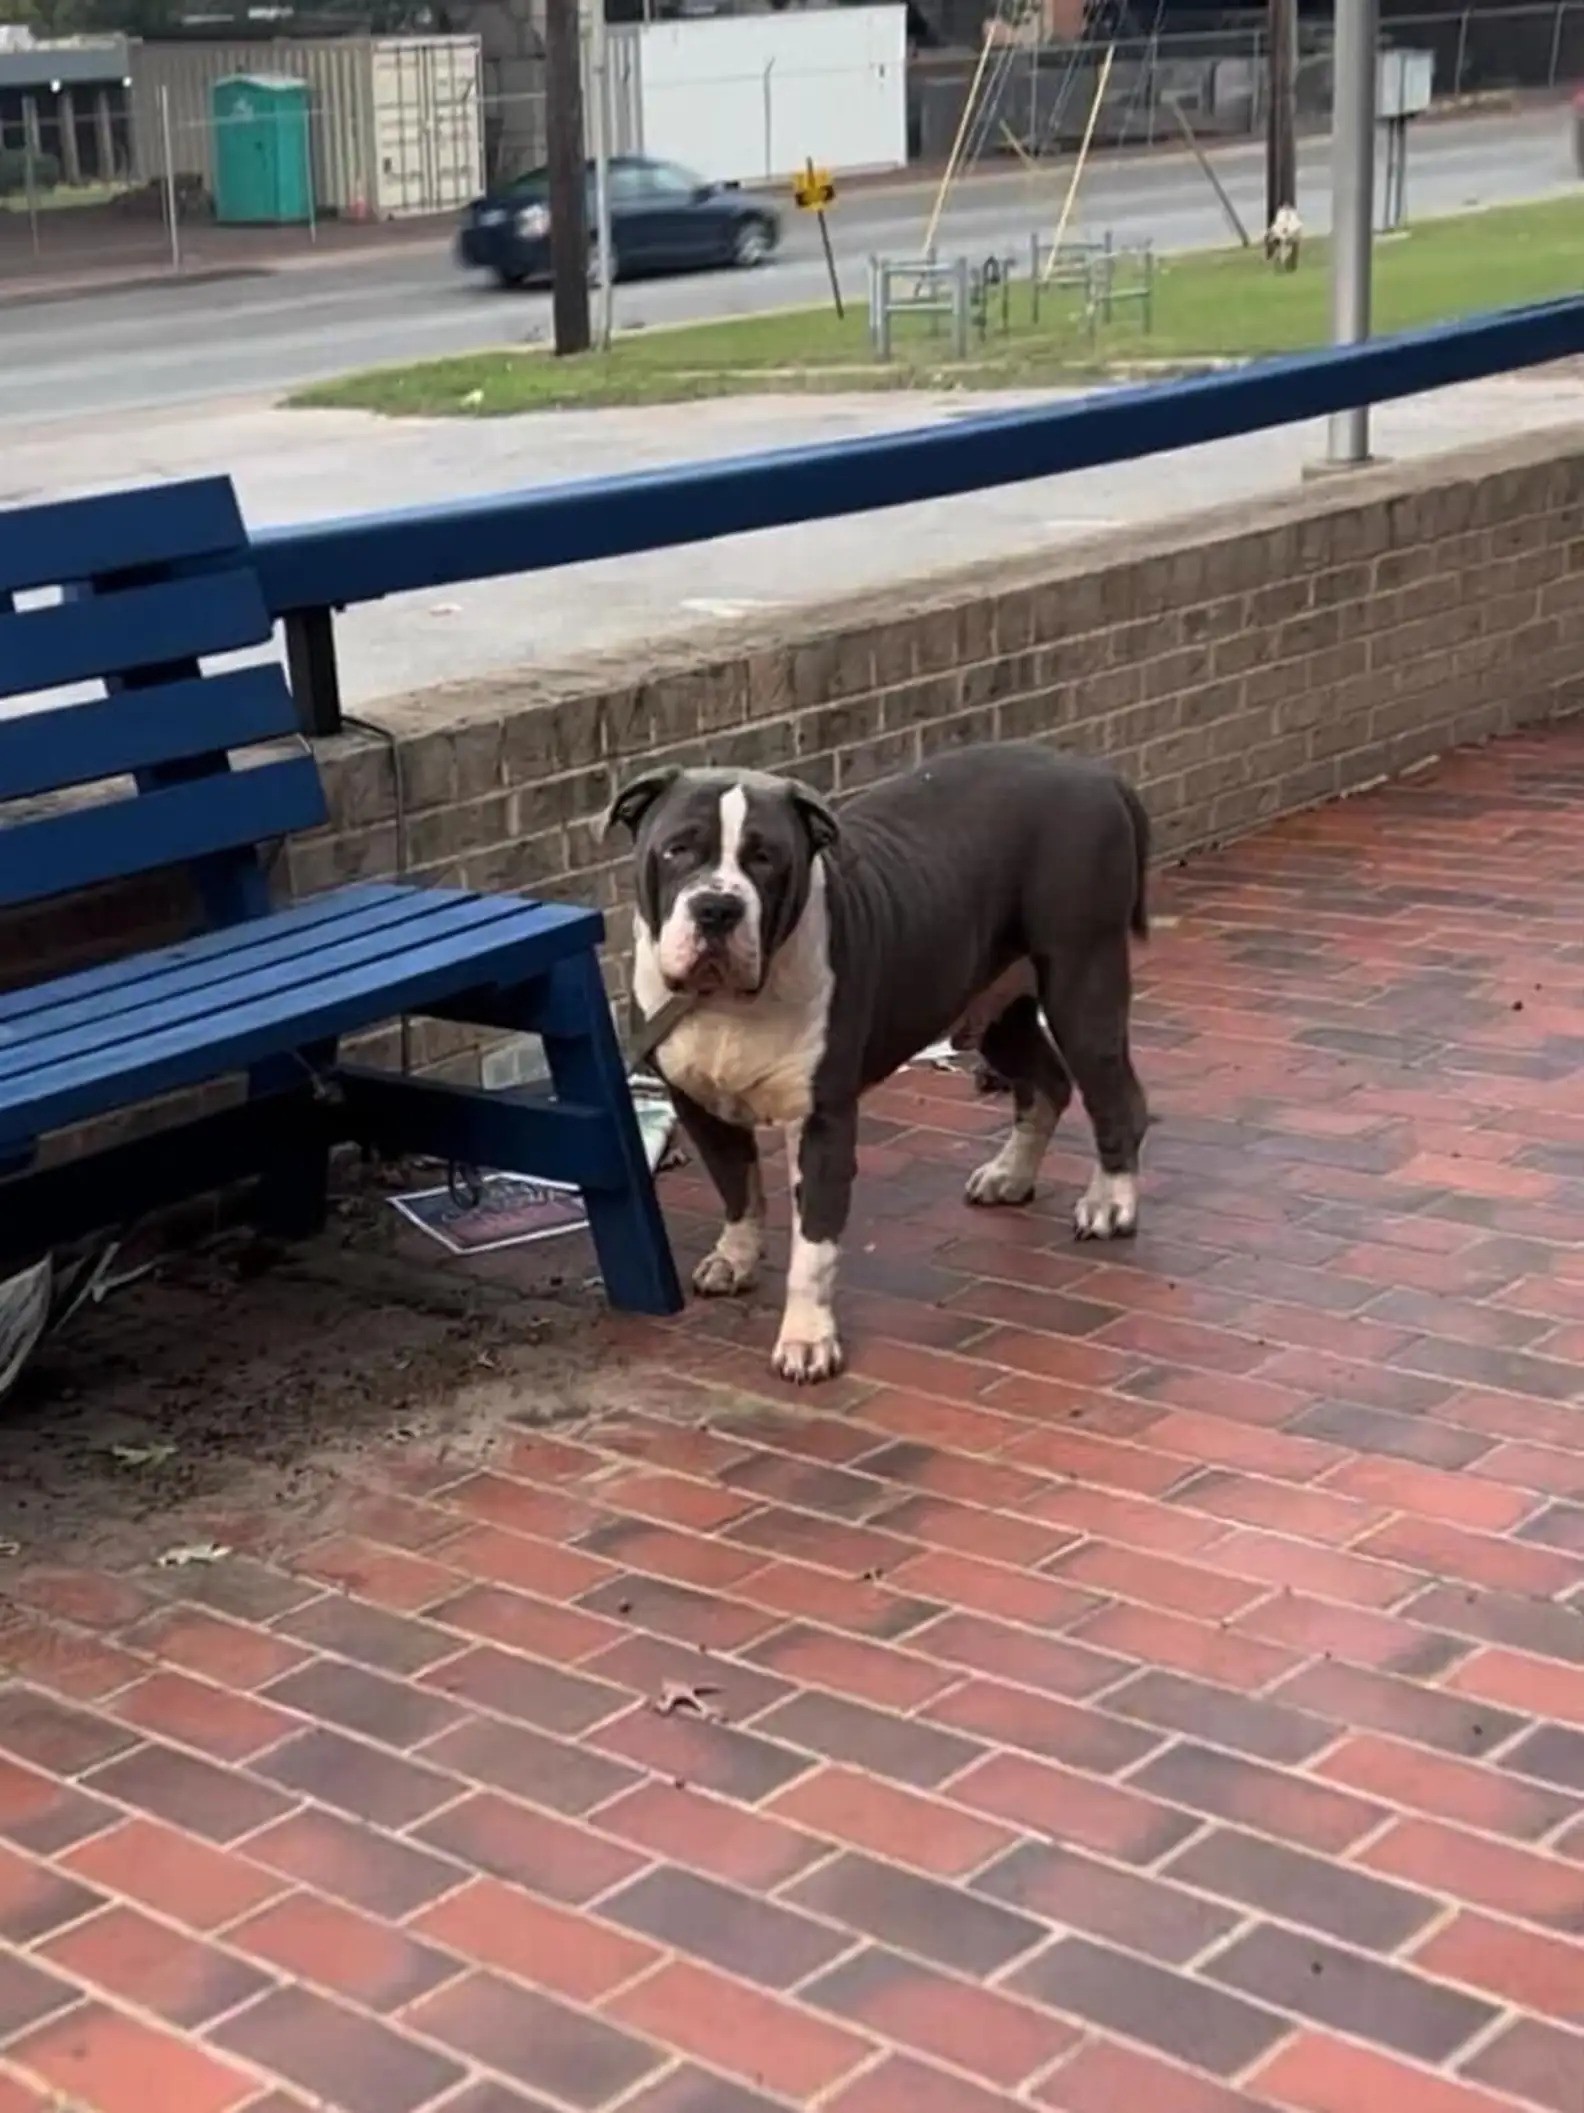 Learn How This Gentle Giant Came From Lonely Park Bench to Cuddly Couch Companion